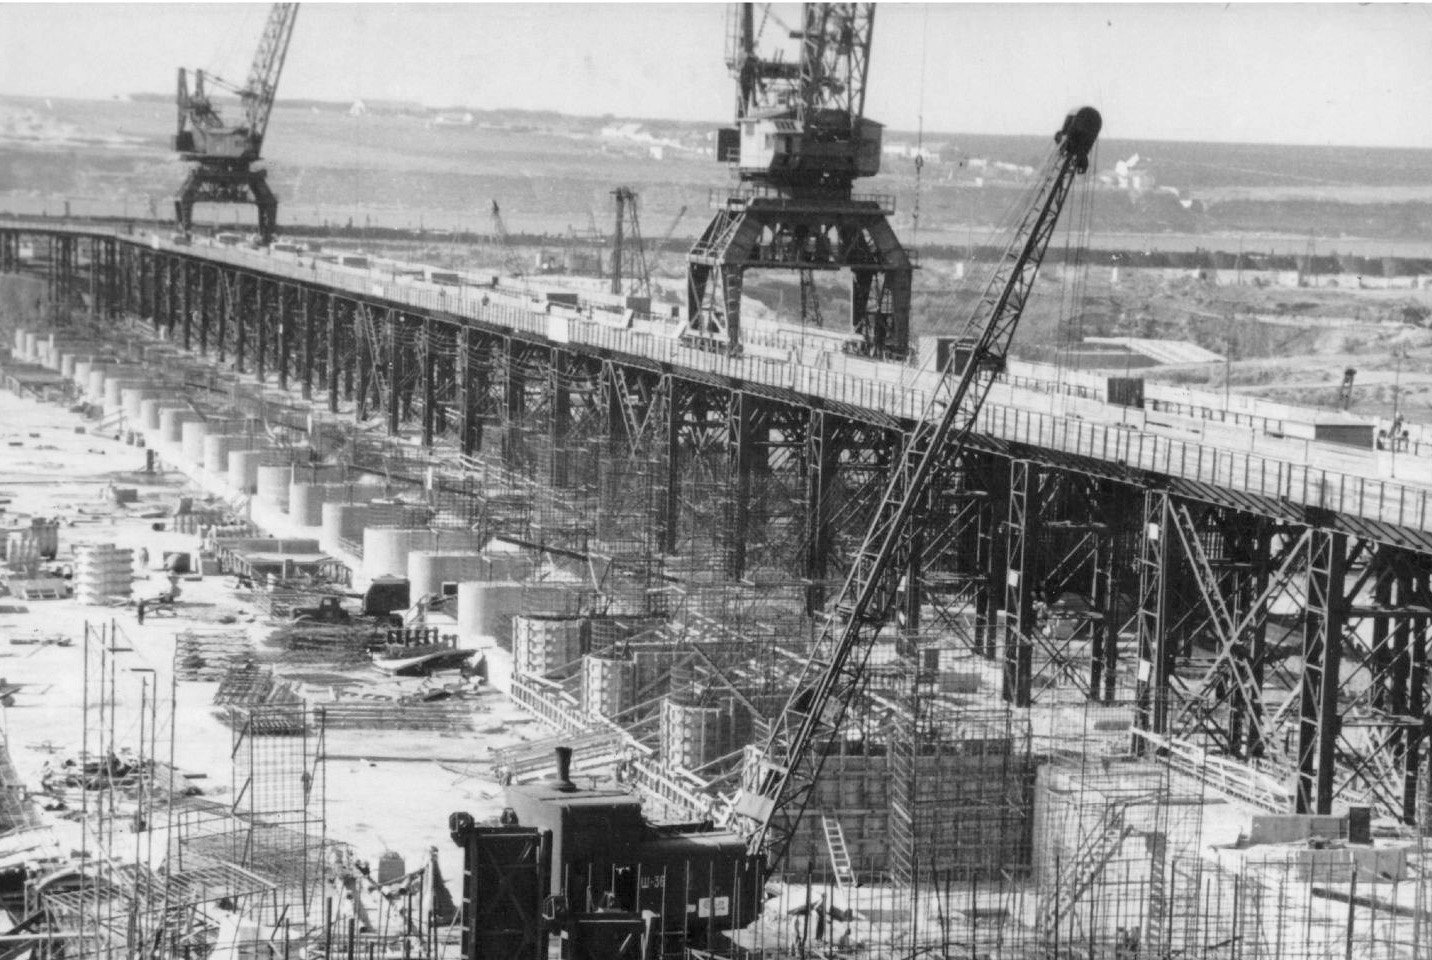 Construction of the Kakhovka HPP, August 20, 1954. Credit: CCAEA/Facebook